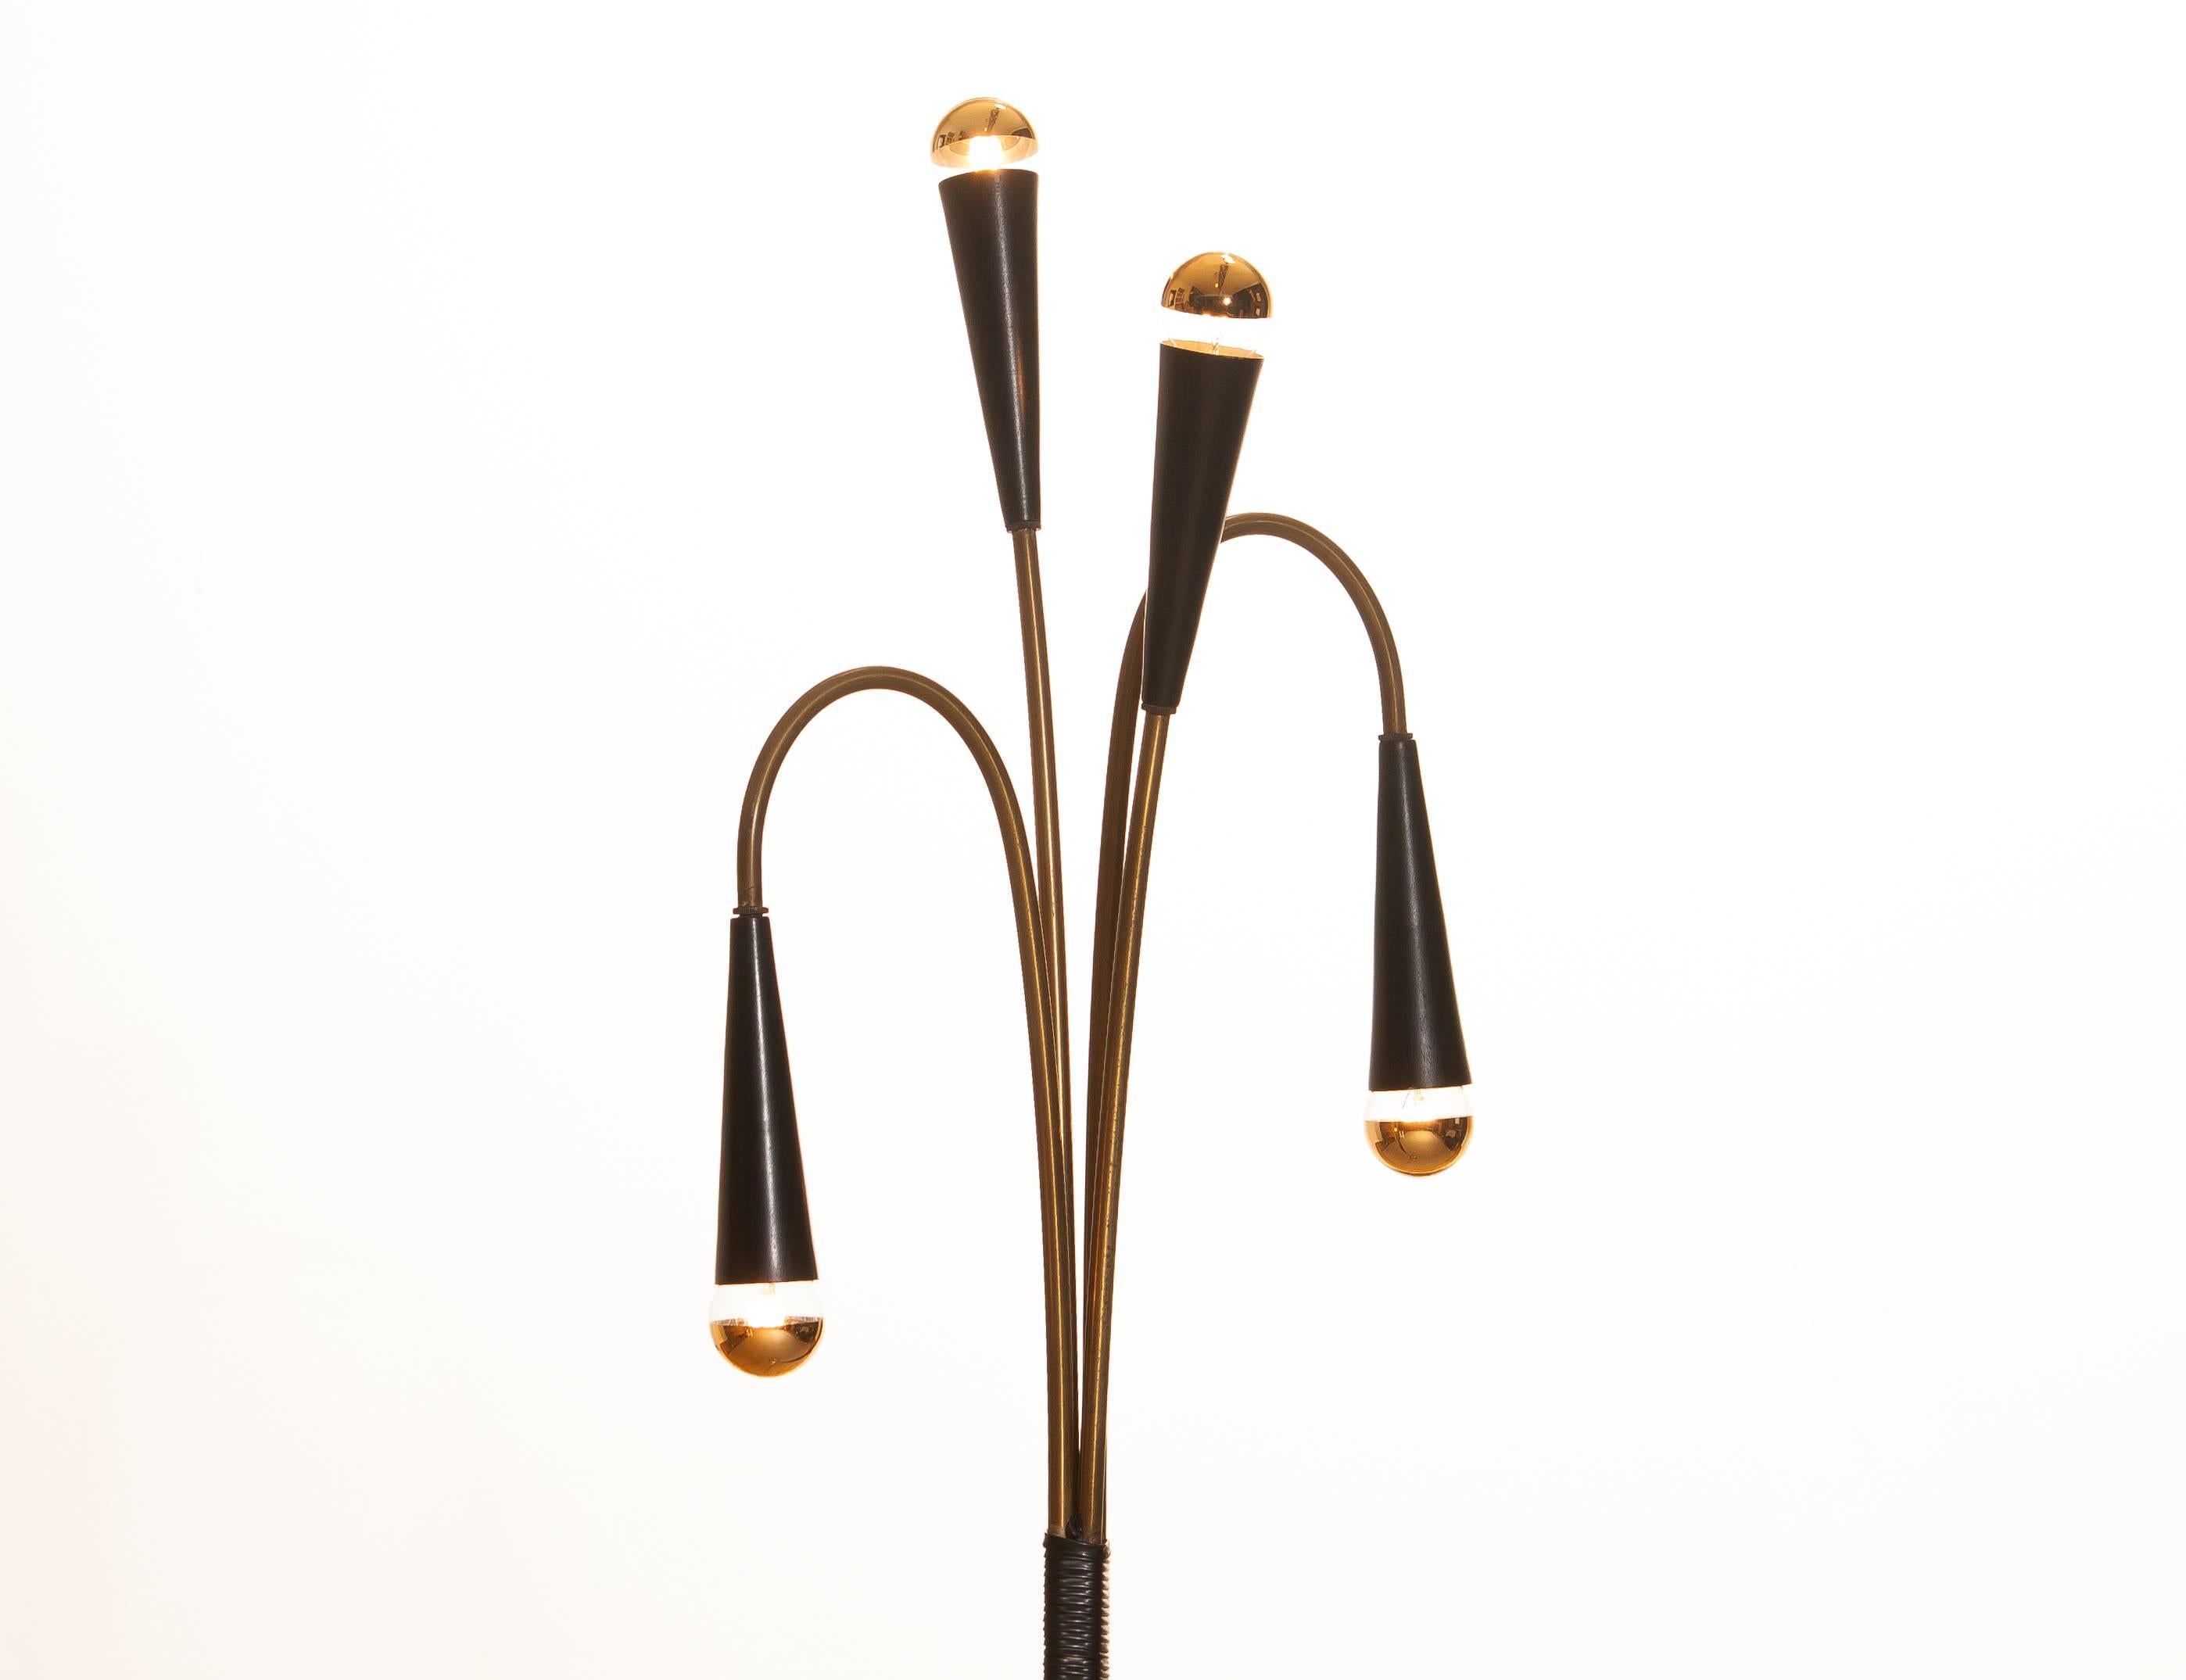 Beautiful floor lamp made by Lumi.
Designed by Oscar Torlasco.
This lamp is made of brass with black lacquered metal details.
It is in an original condition and technical 100%.
Period 1960s.
Dimensions: H 140 cm, W 39 cm.